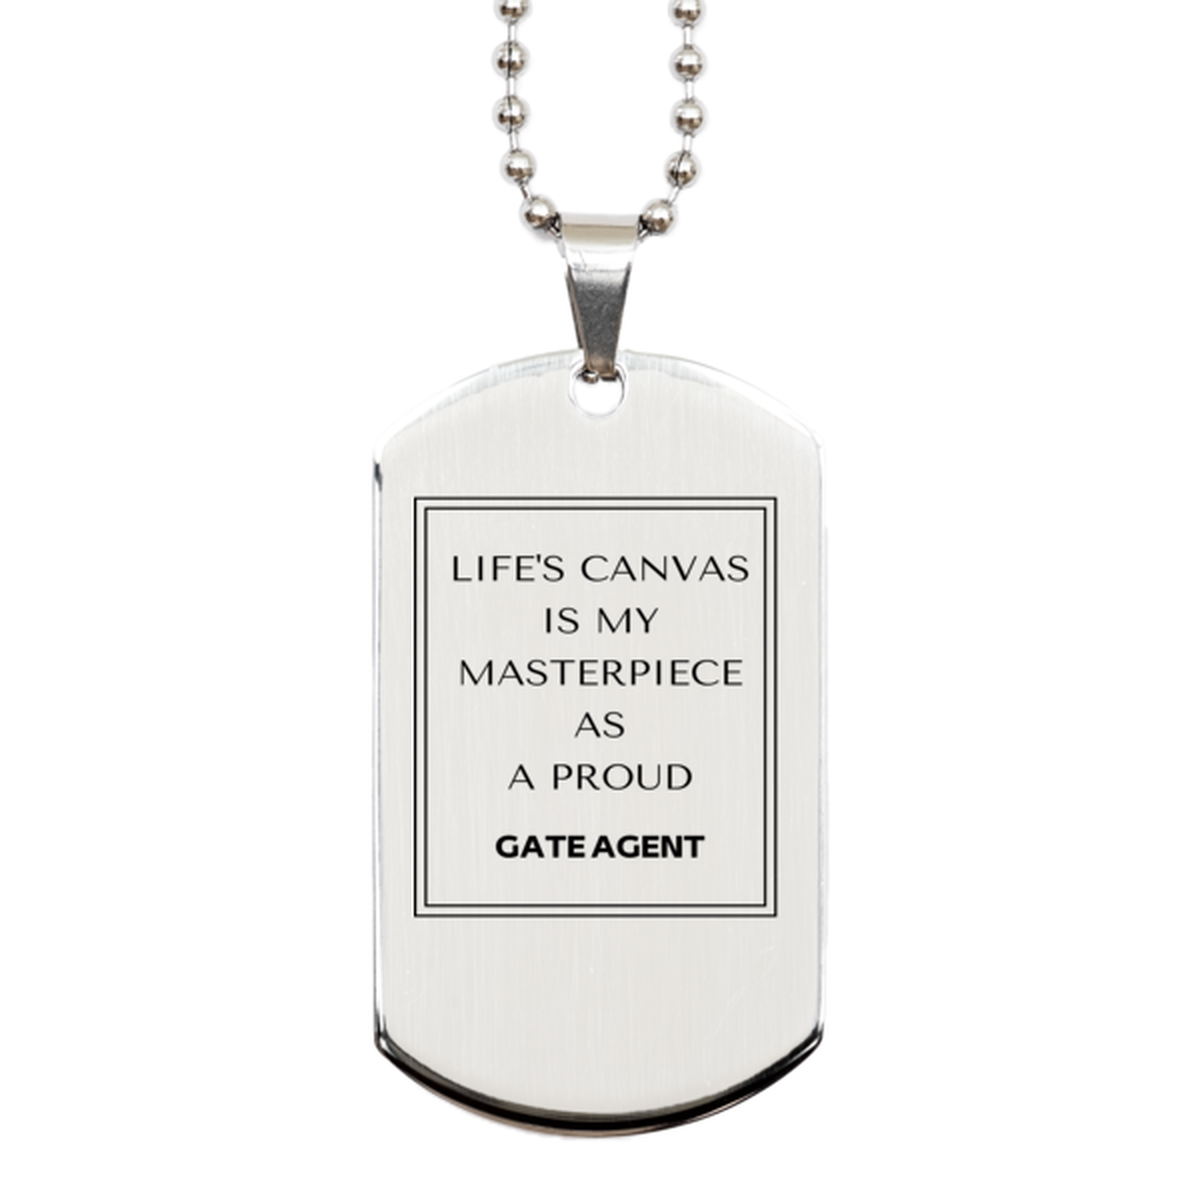 Proud Gate Agent Gifts, Life's canvas is my masterpiece, Epic Birthday Christmas Unique Silver Dog Tag For Gate Agent, Coworkers, Men, Women, Friends